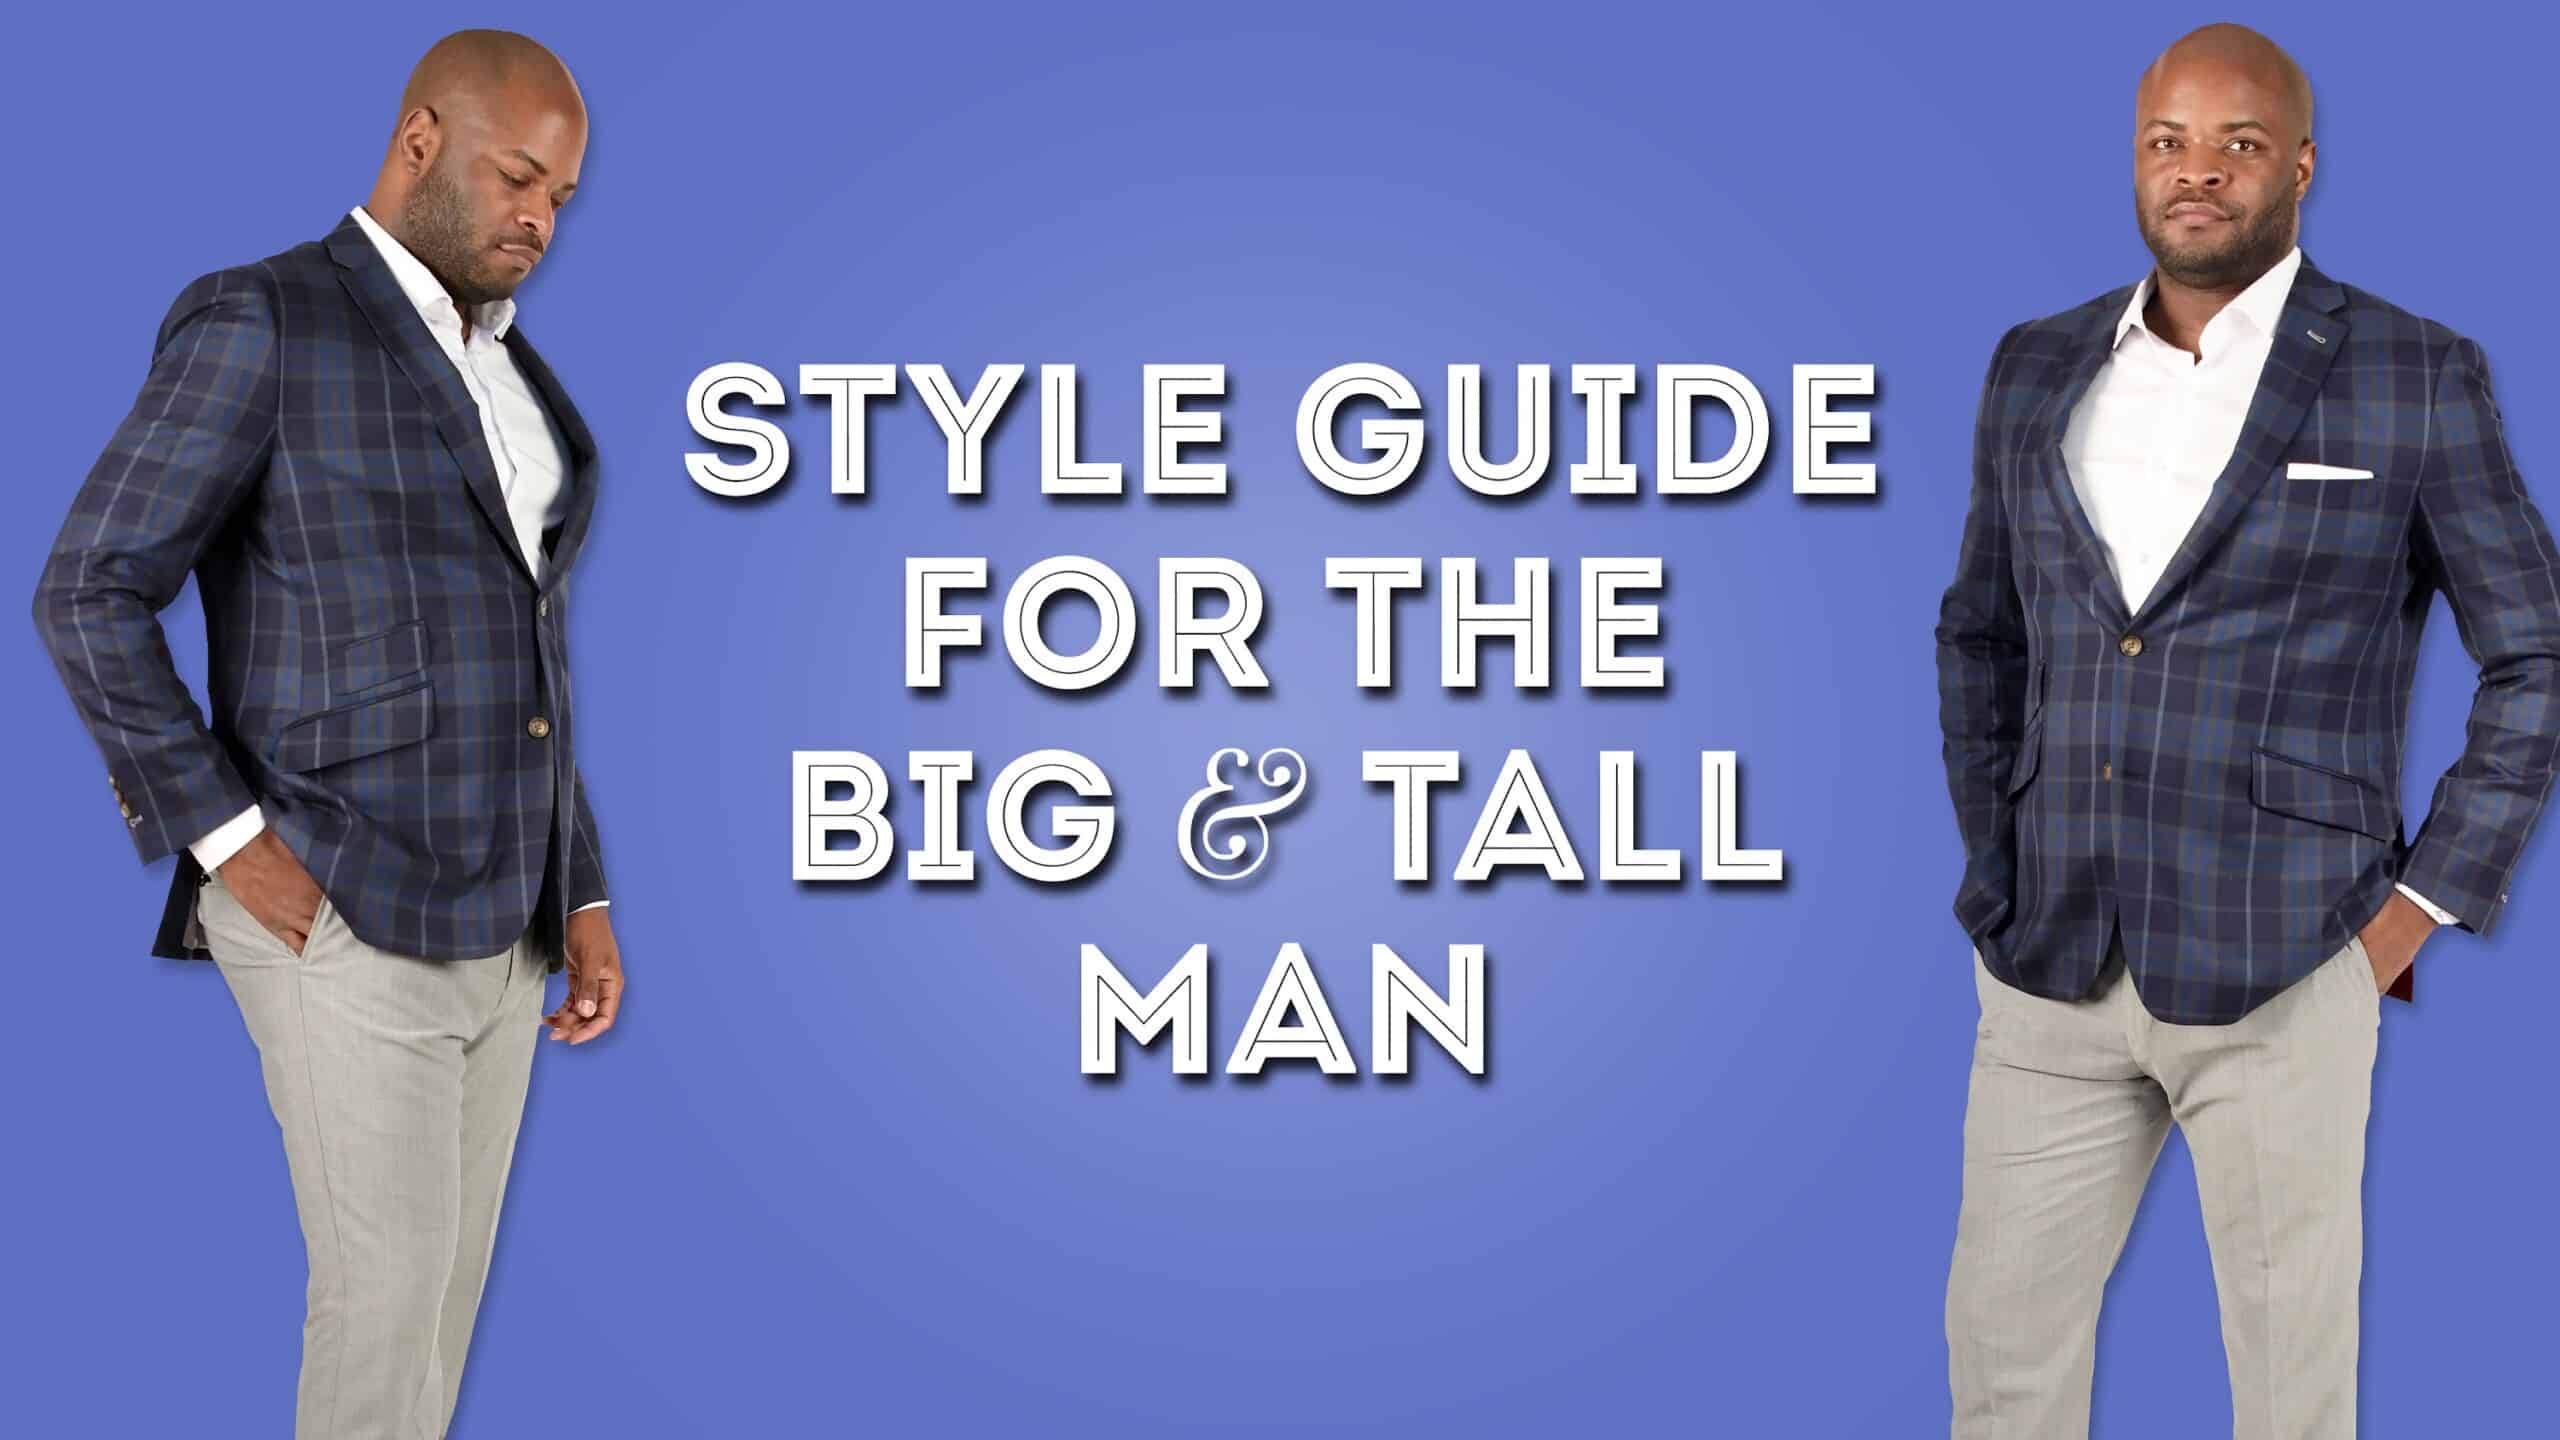 Style Guide For The Big & Tall Man - Outfit Advice For Muscular Or Portly  Men